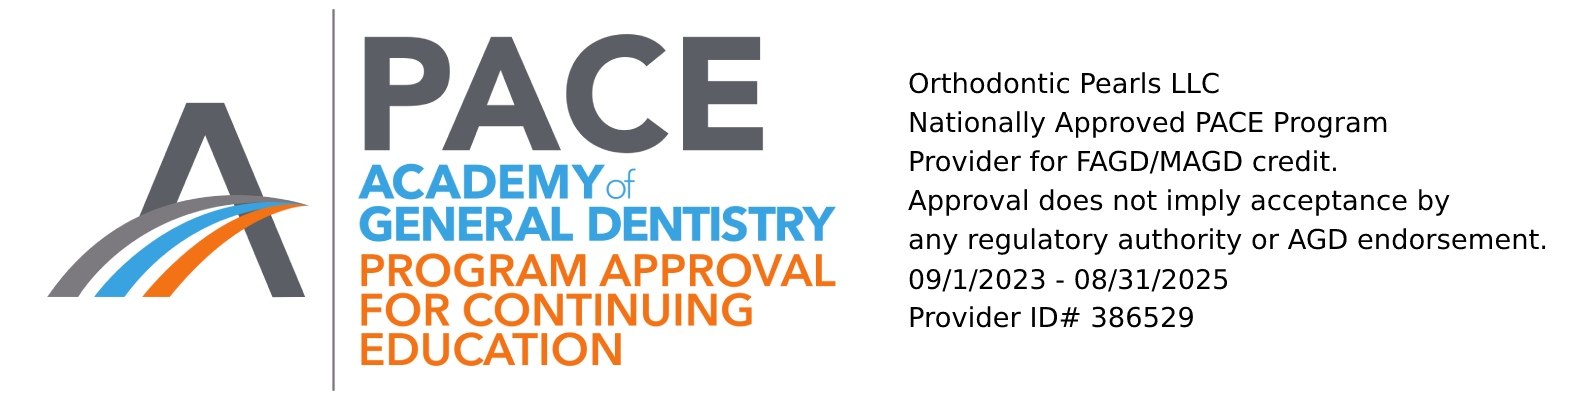 UP TO 21 CE CREDITS ADMINISTERED BY ORTHODONTIC PEARLS